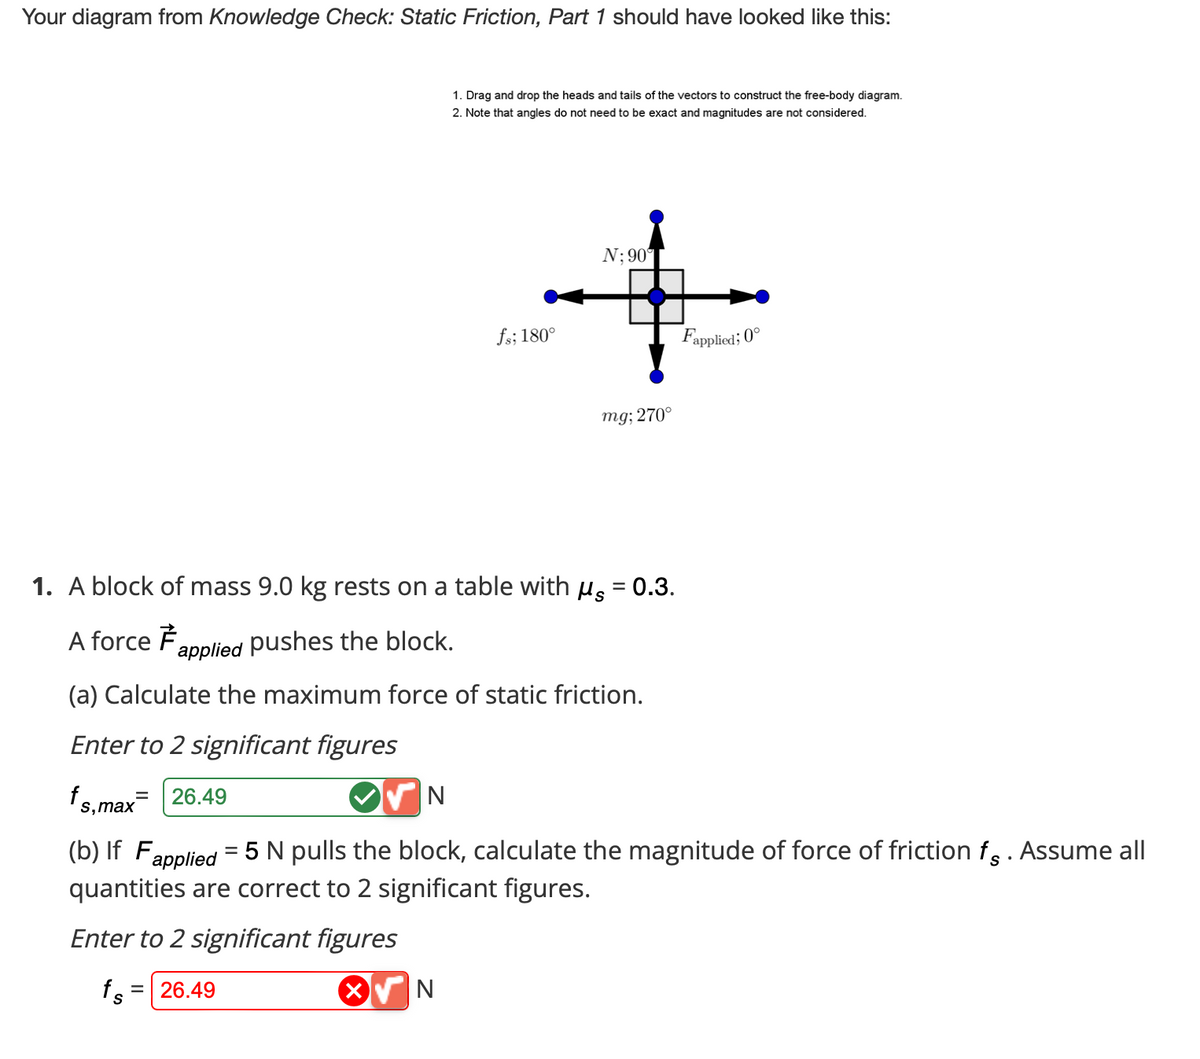 Your diagram from Knowledge Check: Static Friction, Part 1 should have looked like this:
s,max
1. A block of mass 9.0 kg rests on a table with μ = 0.3.
A force #
applied pushes the block.
= 26.49
(a) Calculate the maximum force of static friction.
Enter to 2 significant figures
Enter to 2 significant figures
X
fs
1. Drag and drop the heads and tails of the vectors to construct the free-body diagram.
2. Note that angles do not need to be exact and magnitudes are not considered.
N; 90°
+
Fapplied; 0°
N
(b) If Fapplied = 5 N pulls the block, calculate the magnitude of force of friction f . Assume all
quantities are correct to significant figures.
= 26.49
fs; 180°
N
mg; 270°